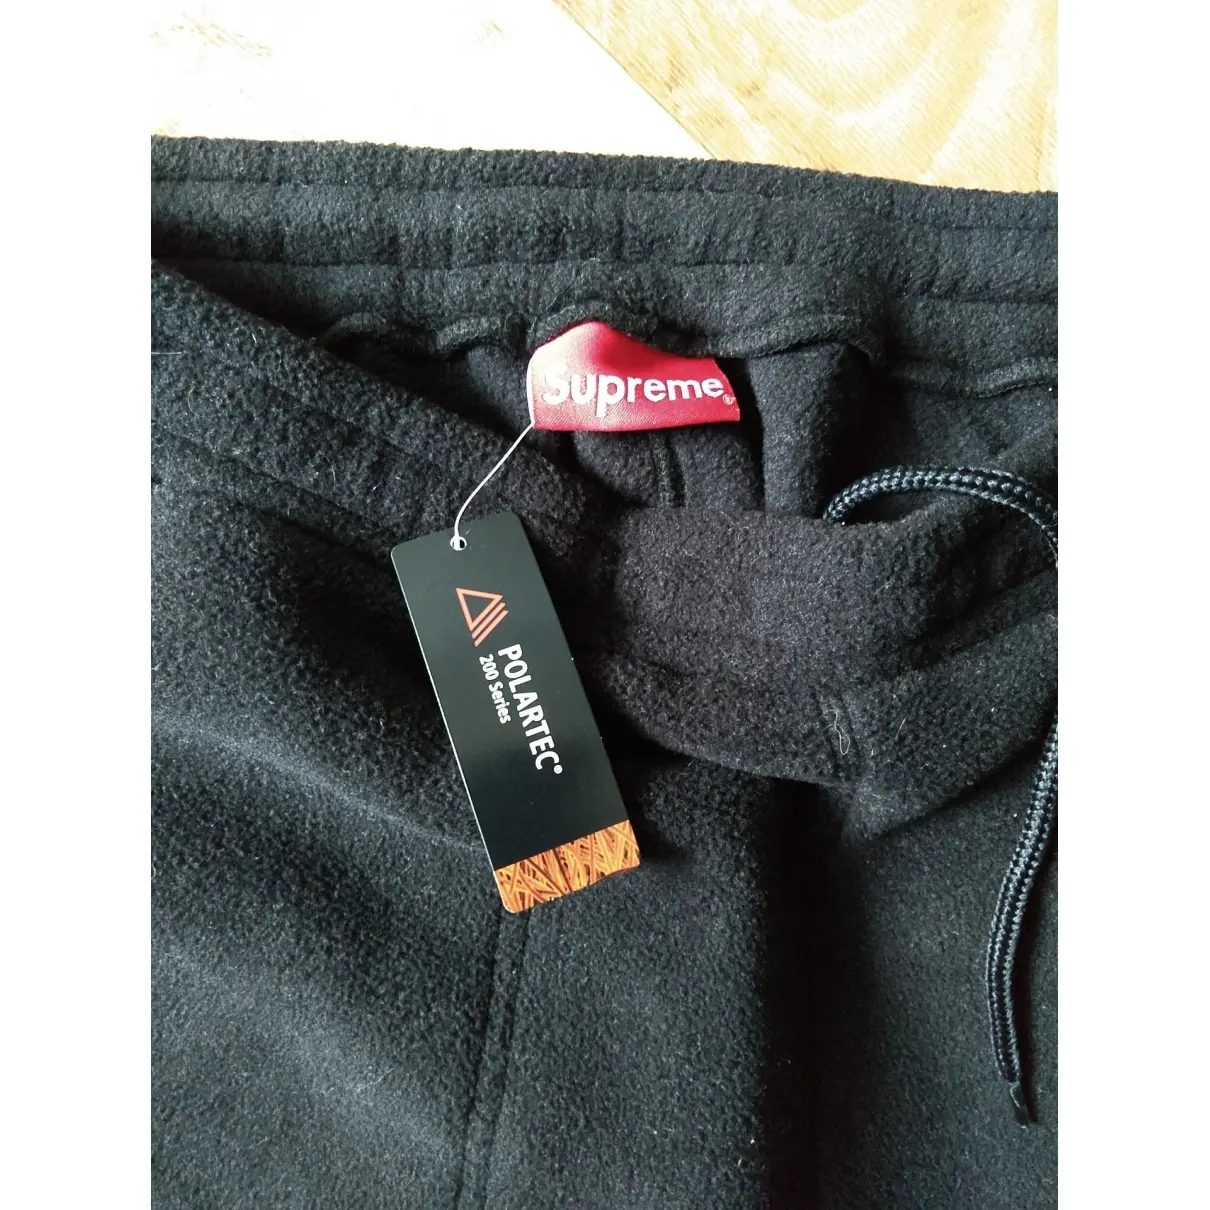 Supreme Trousers for sale